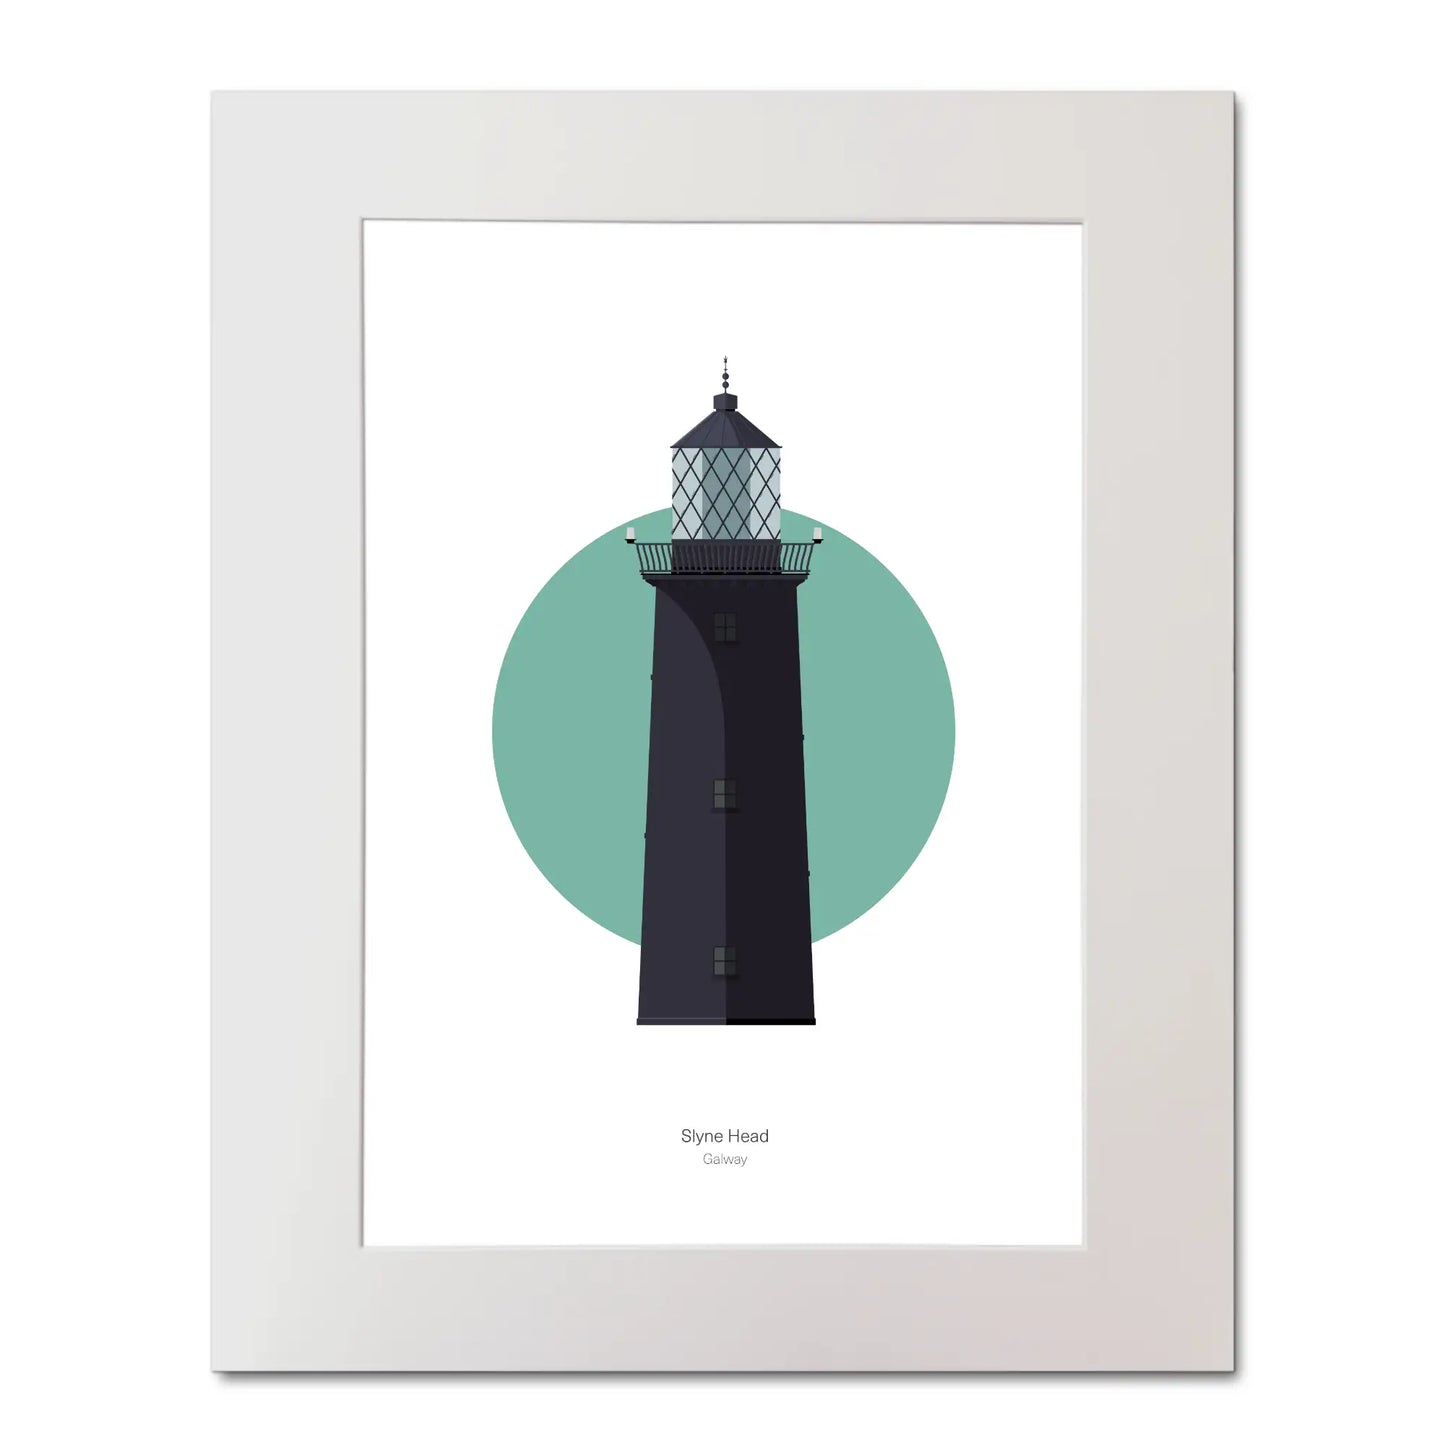 Illustration of Slyne_Head lighthouse on a white background inside light blue square, mounted and measuring 40x50cm.